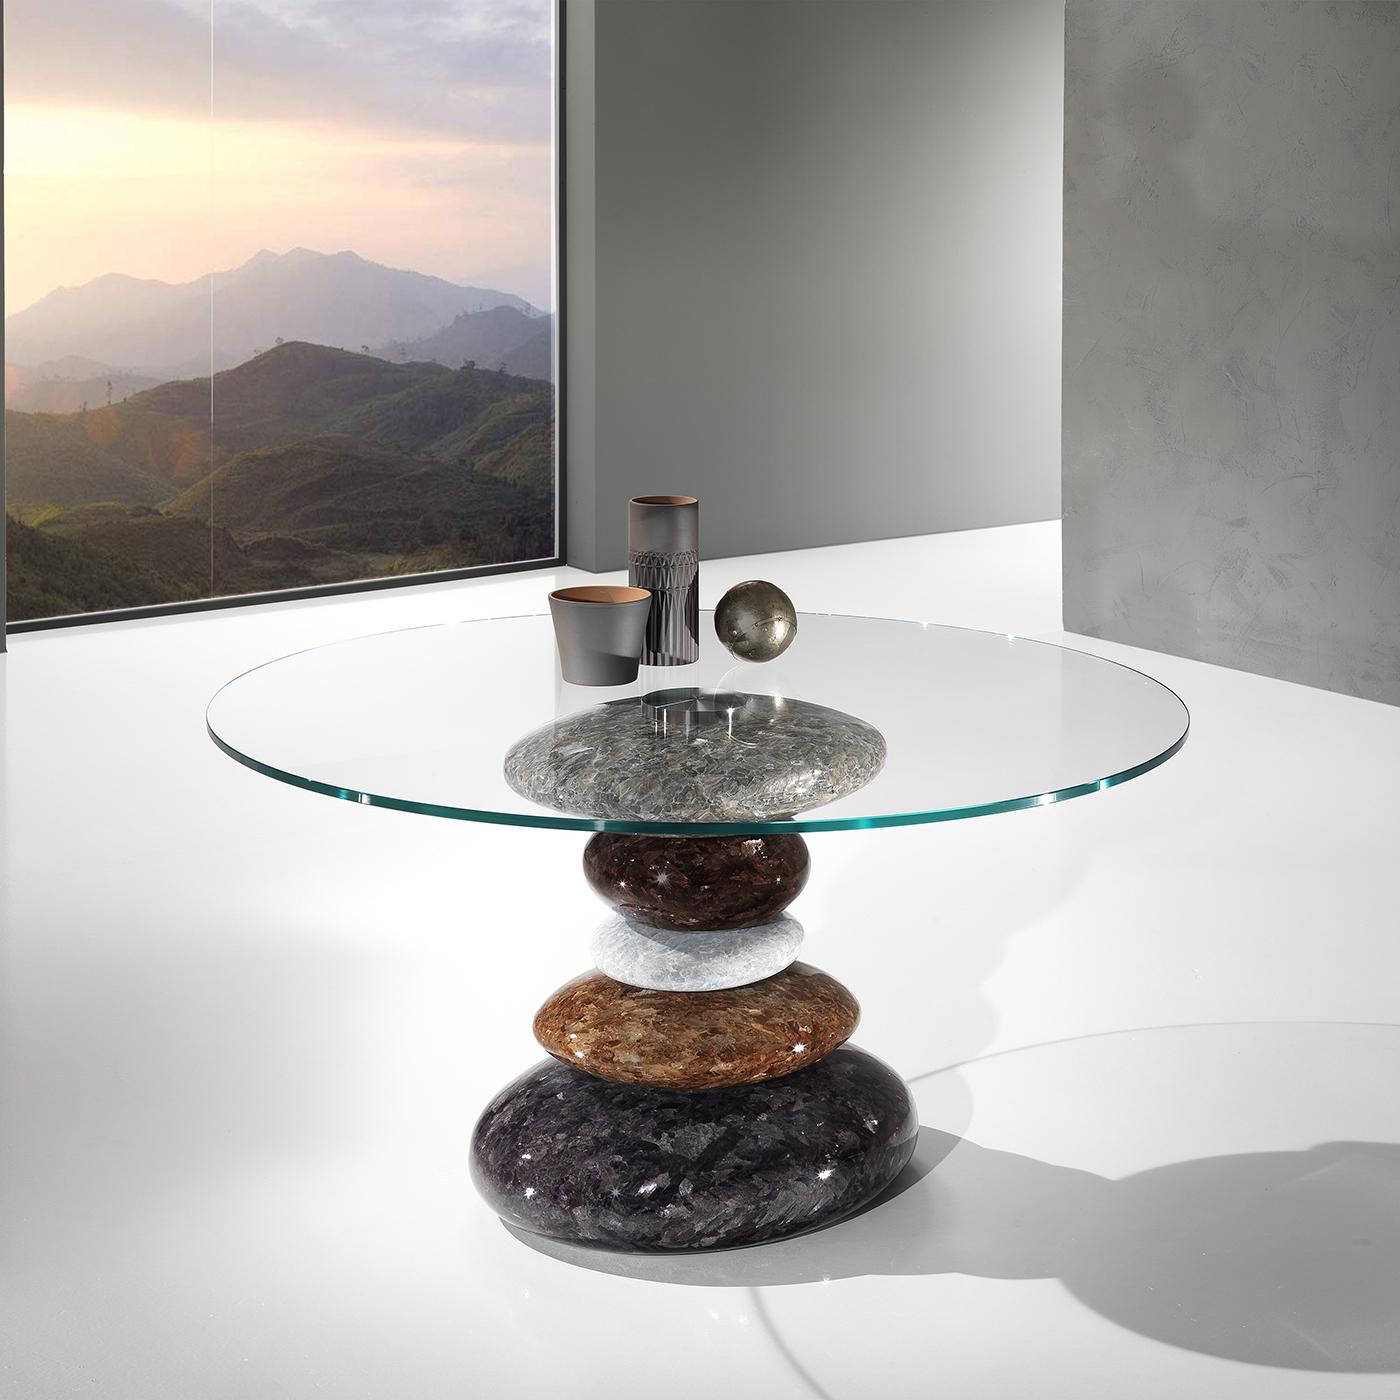 This sublime piece of decor pays tribute to Japan's artistic Suiseki tradition of water-shaped stone. The table's stunning base features 5 elements carved and finished by hand from a single block of Crystal Stone®, a unique alabaster quarried